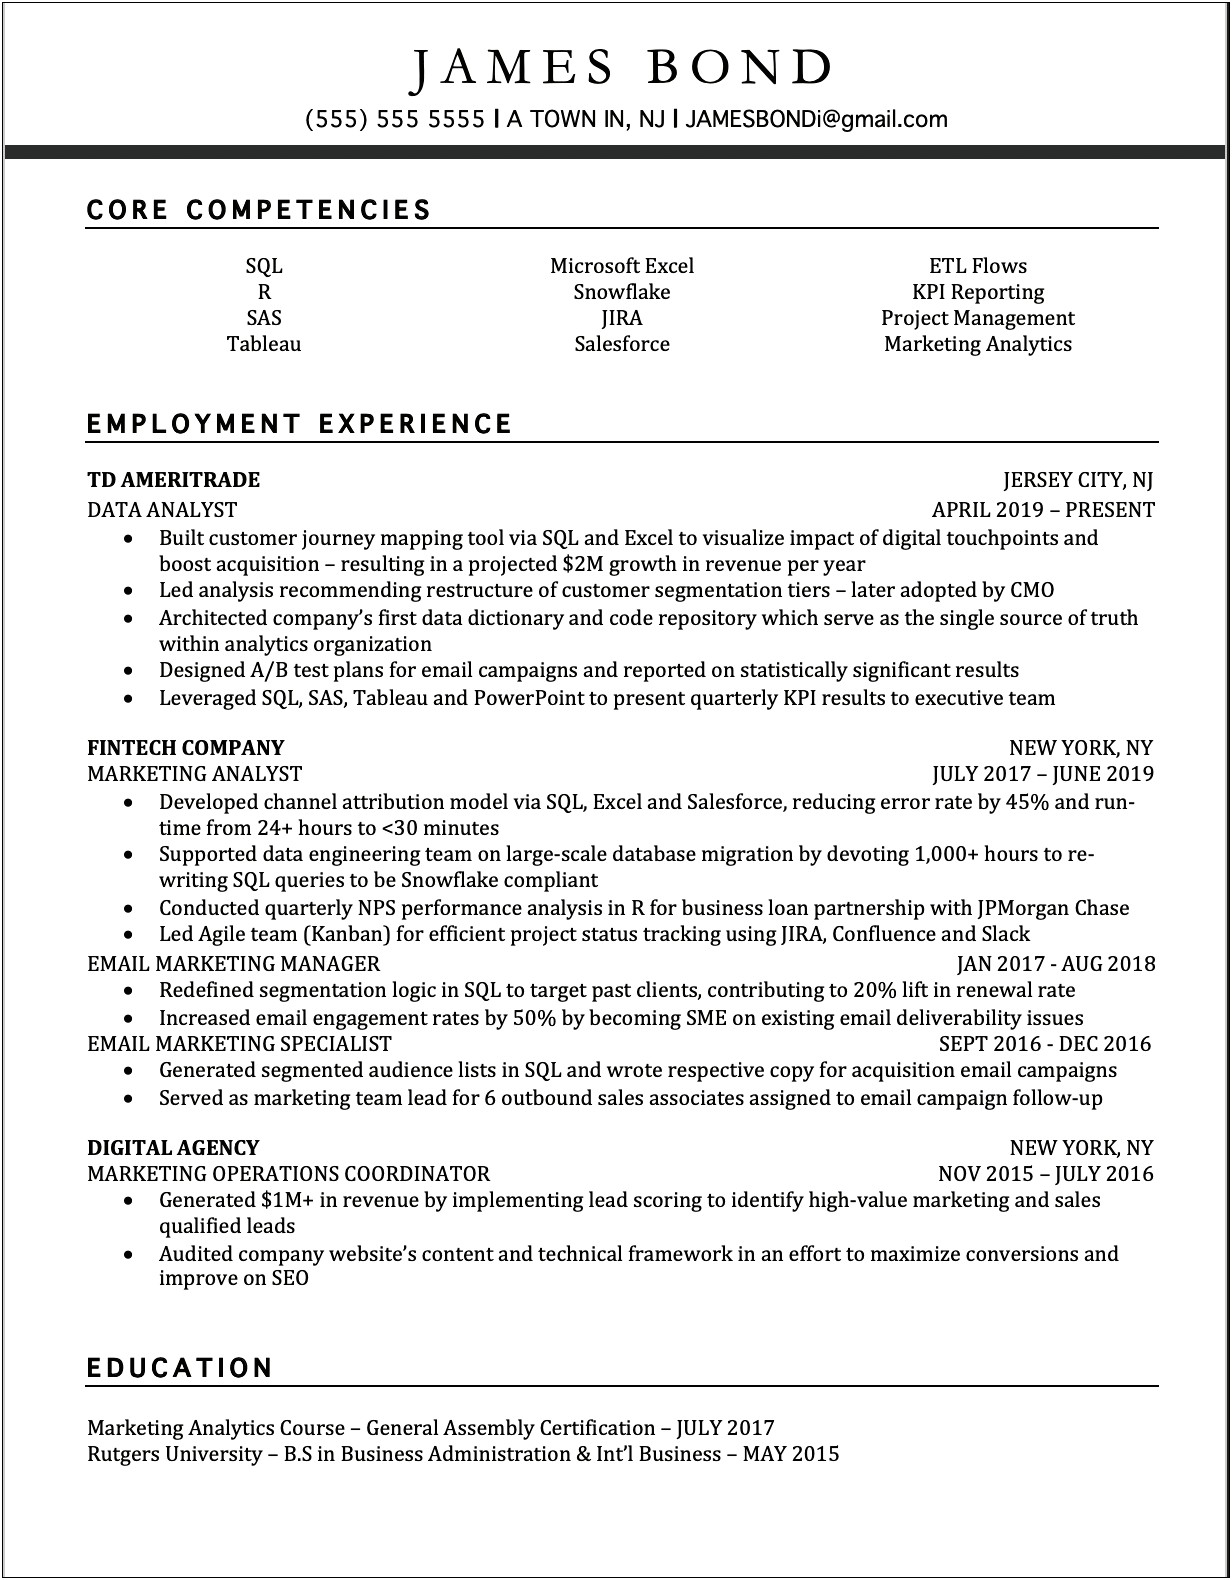 Resume Template For One Company Multiple Positions